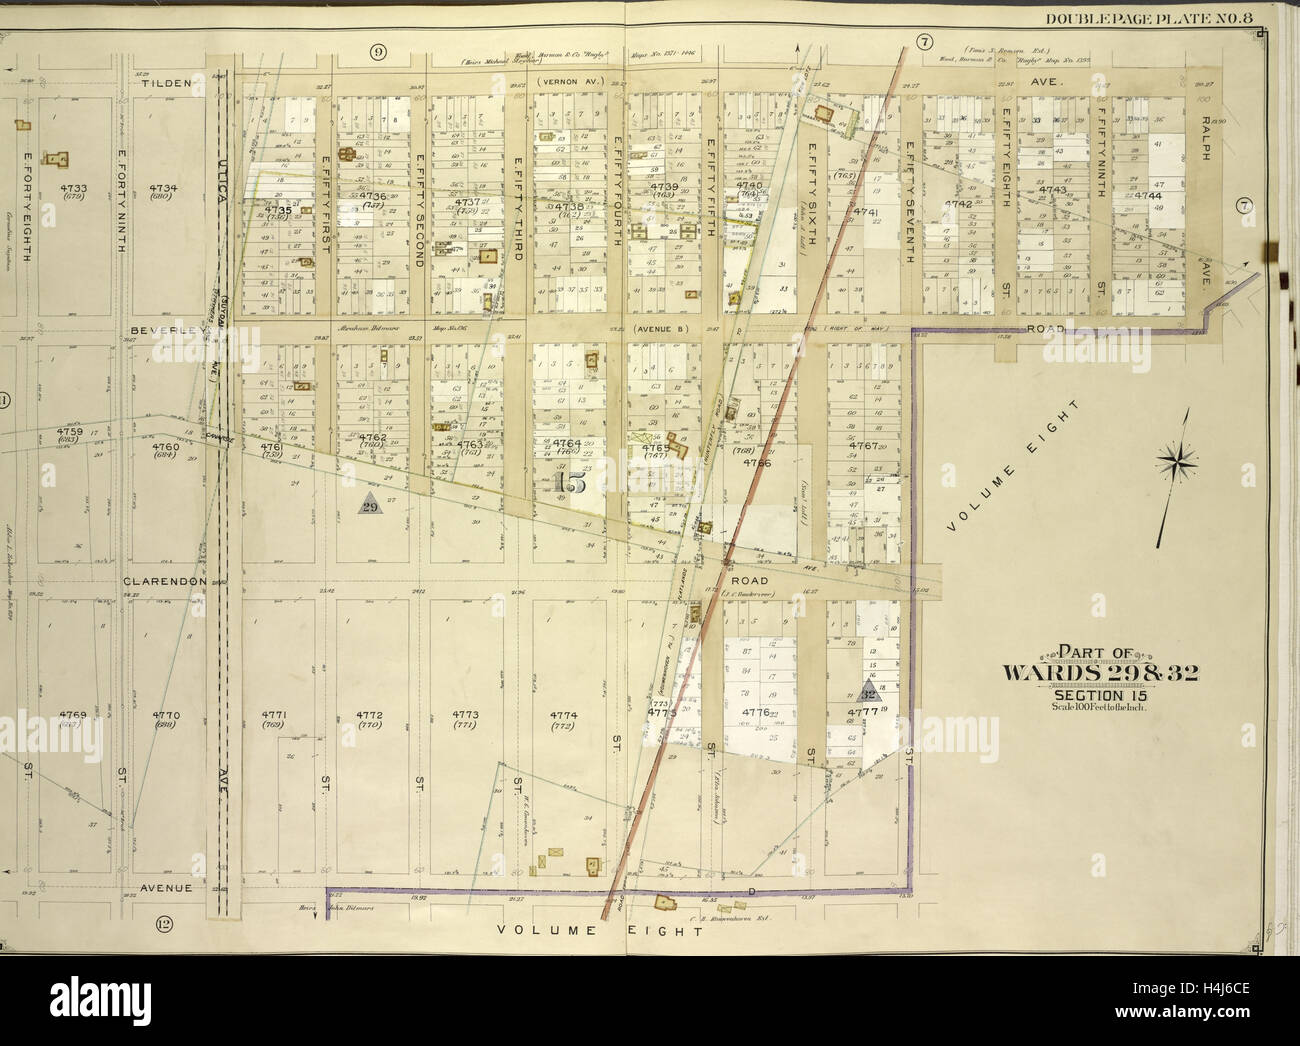 Brooklyn, Vol. 5, Double Page Plate No. 8; Part of Wards 29 & 32, Section 15; Map bounded by Tilden Ave., Ralph Ave. Stock Photo